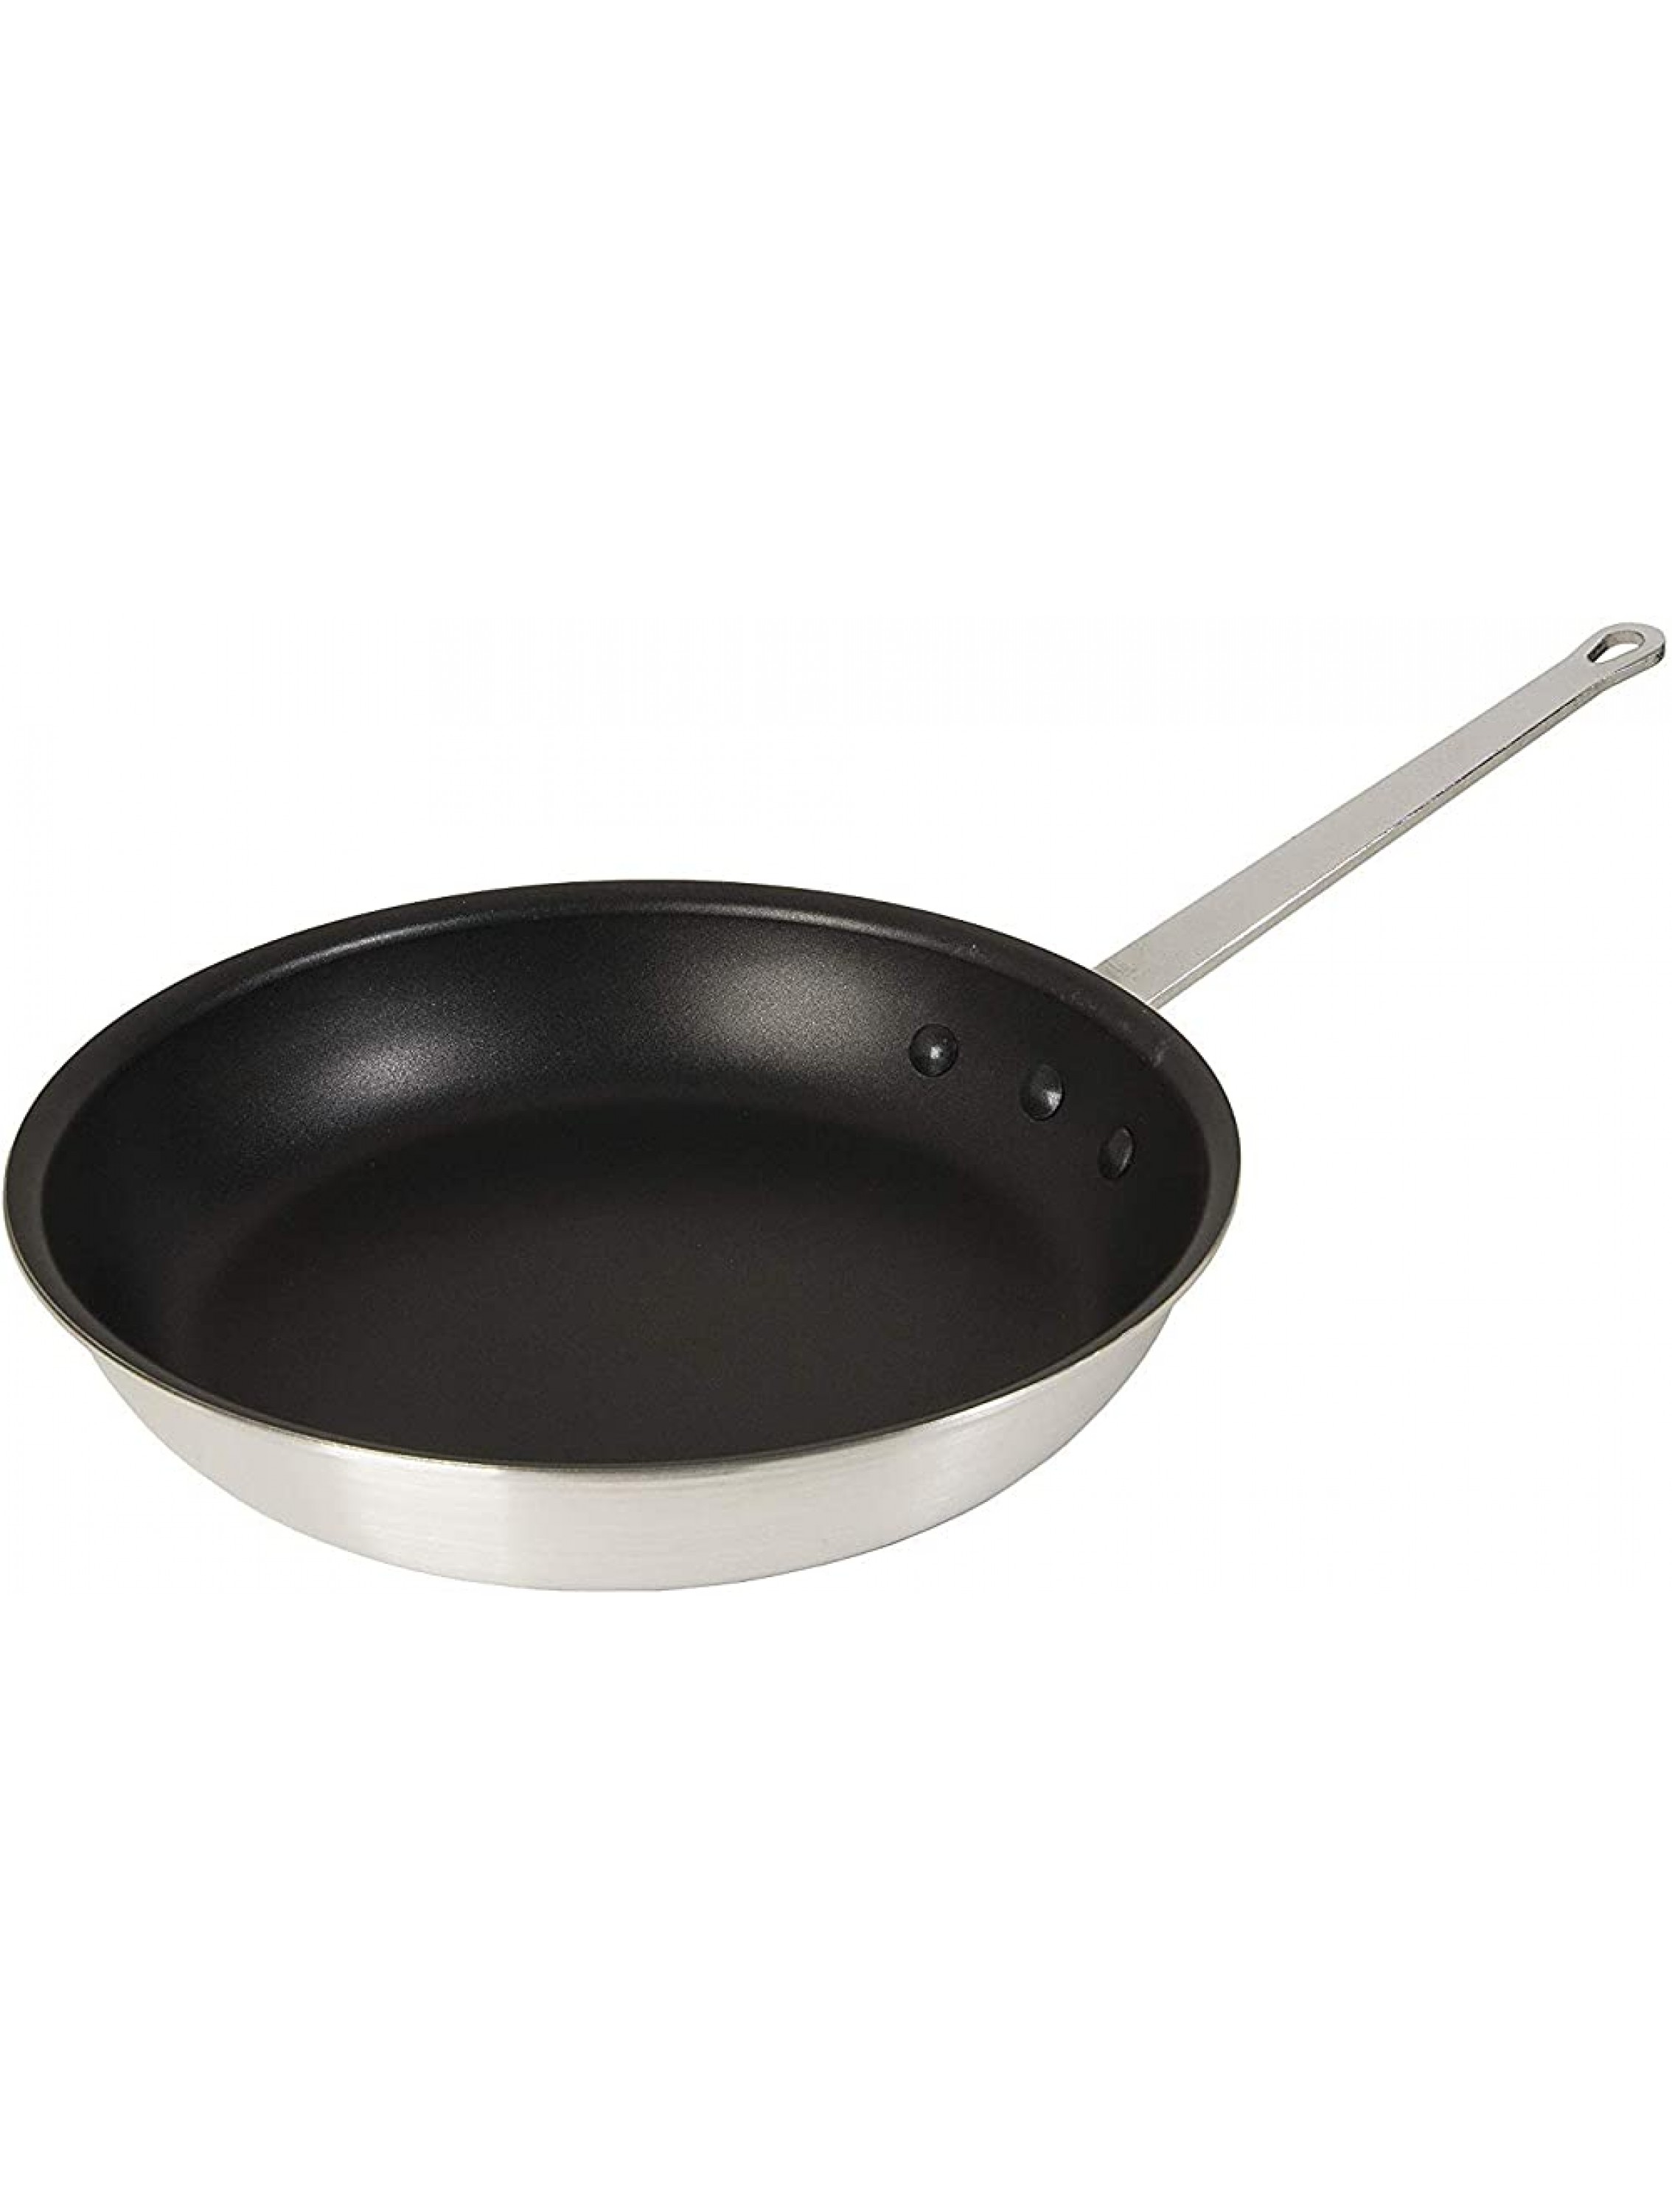 7-Inch ECLIPSE Nonstick Aluminum Frying Pan Fry Pan Saute Omelette Pan Commercial Grade NSF Certified 1 A - BX4BHGBUI